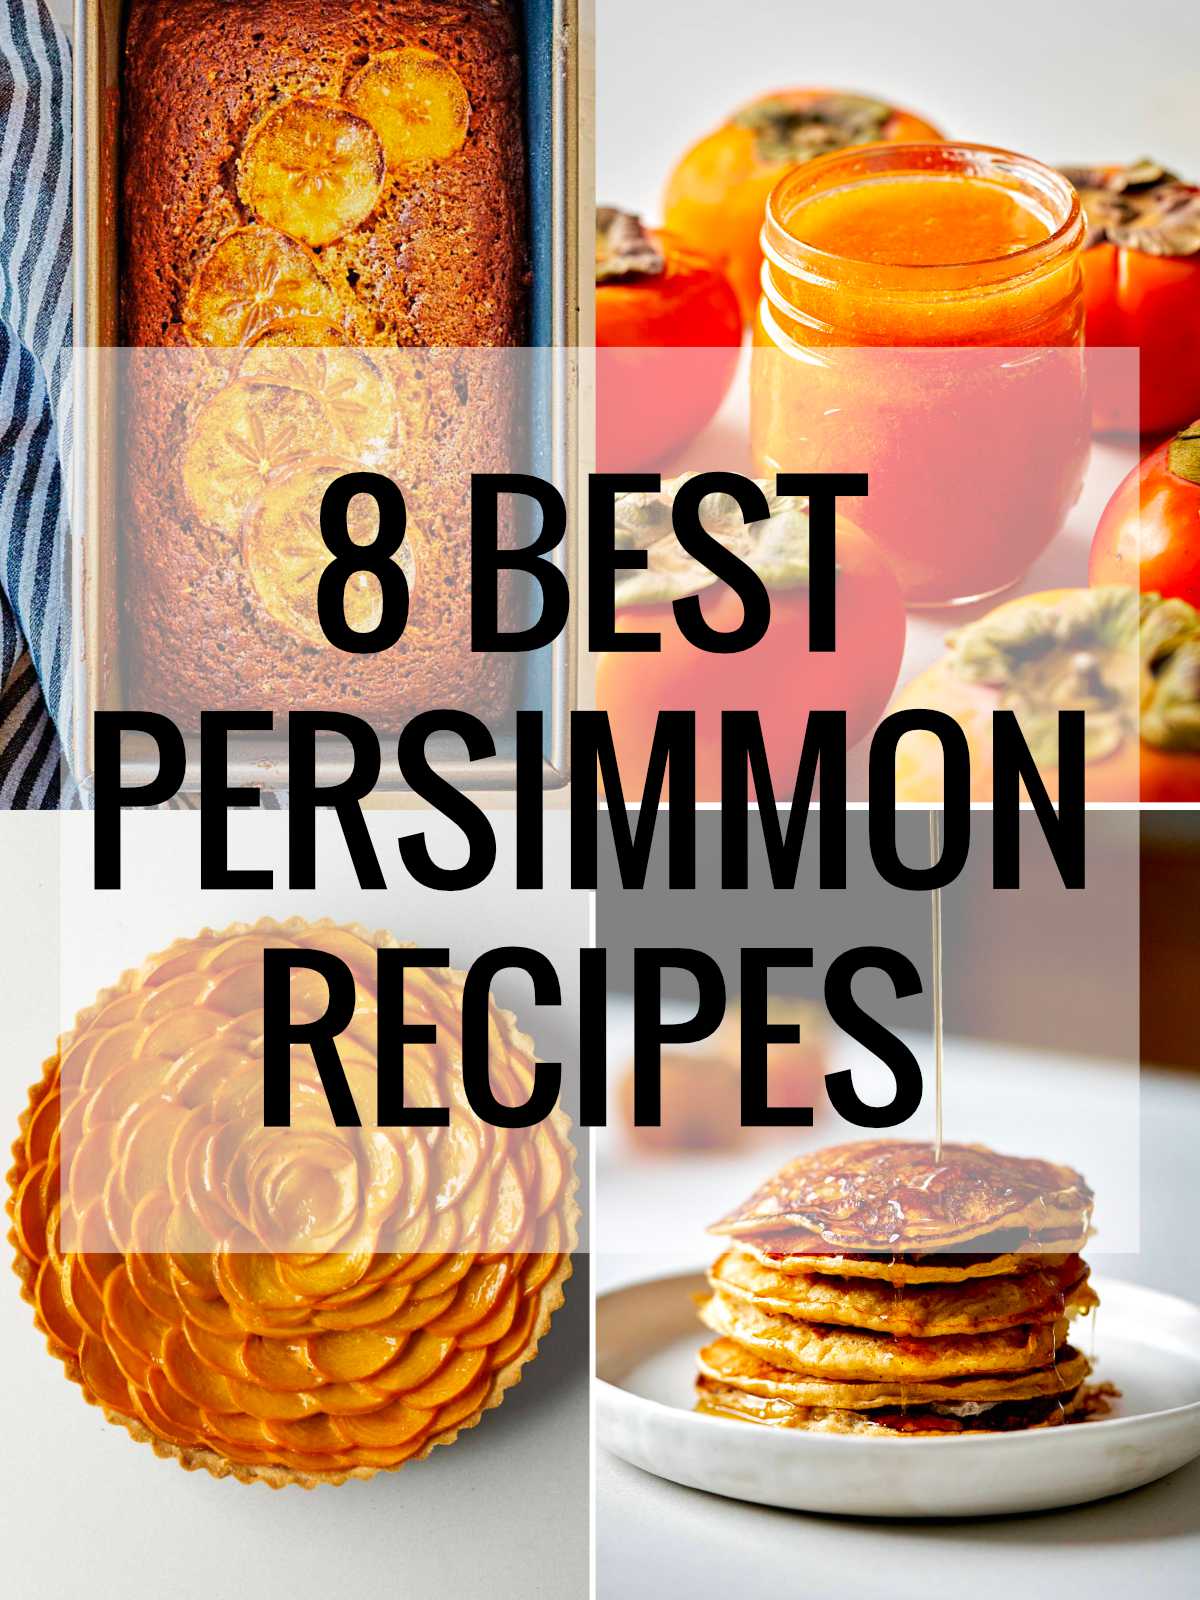 Four persimmon recipes tiled with title text over the top.